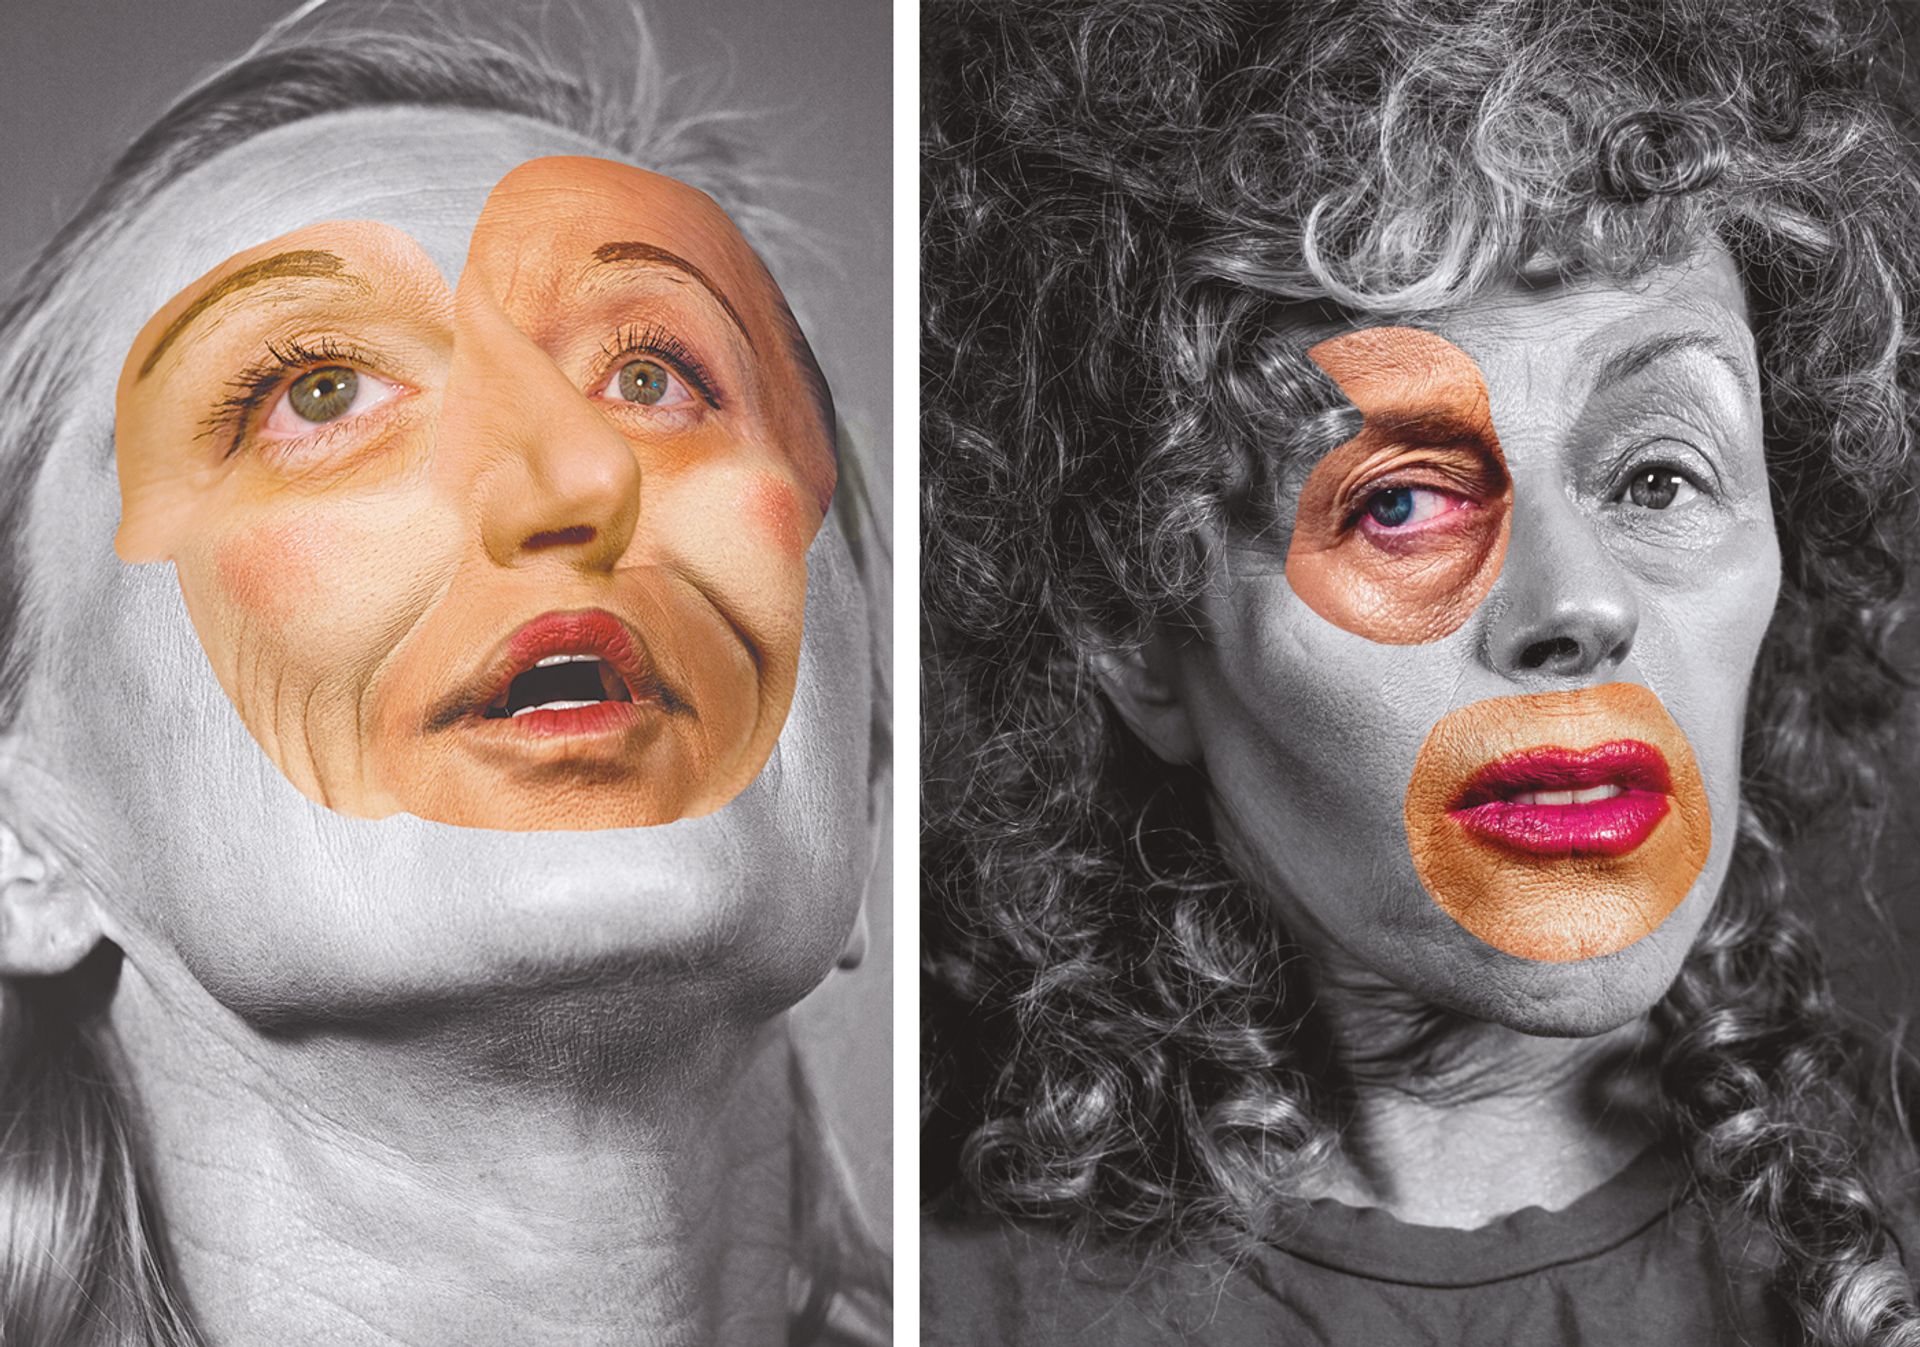 Cindy Sherman Exhibition at Fondation Louis Vuitton: I dress up, so I am